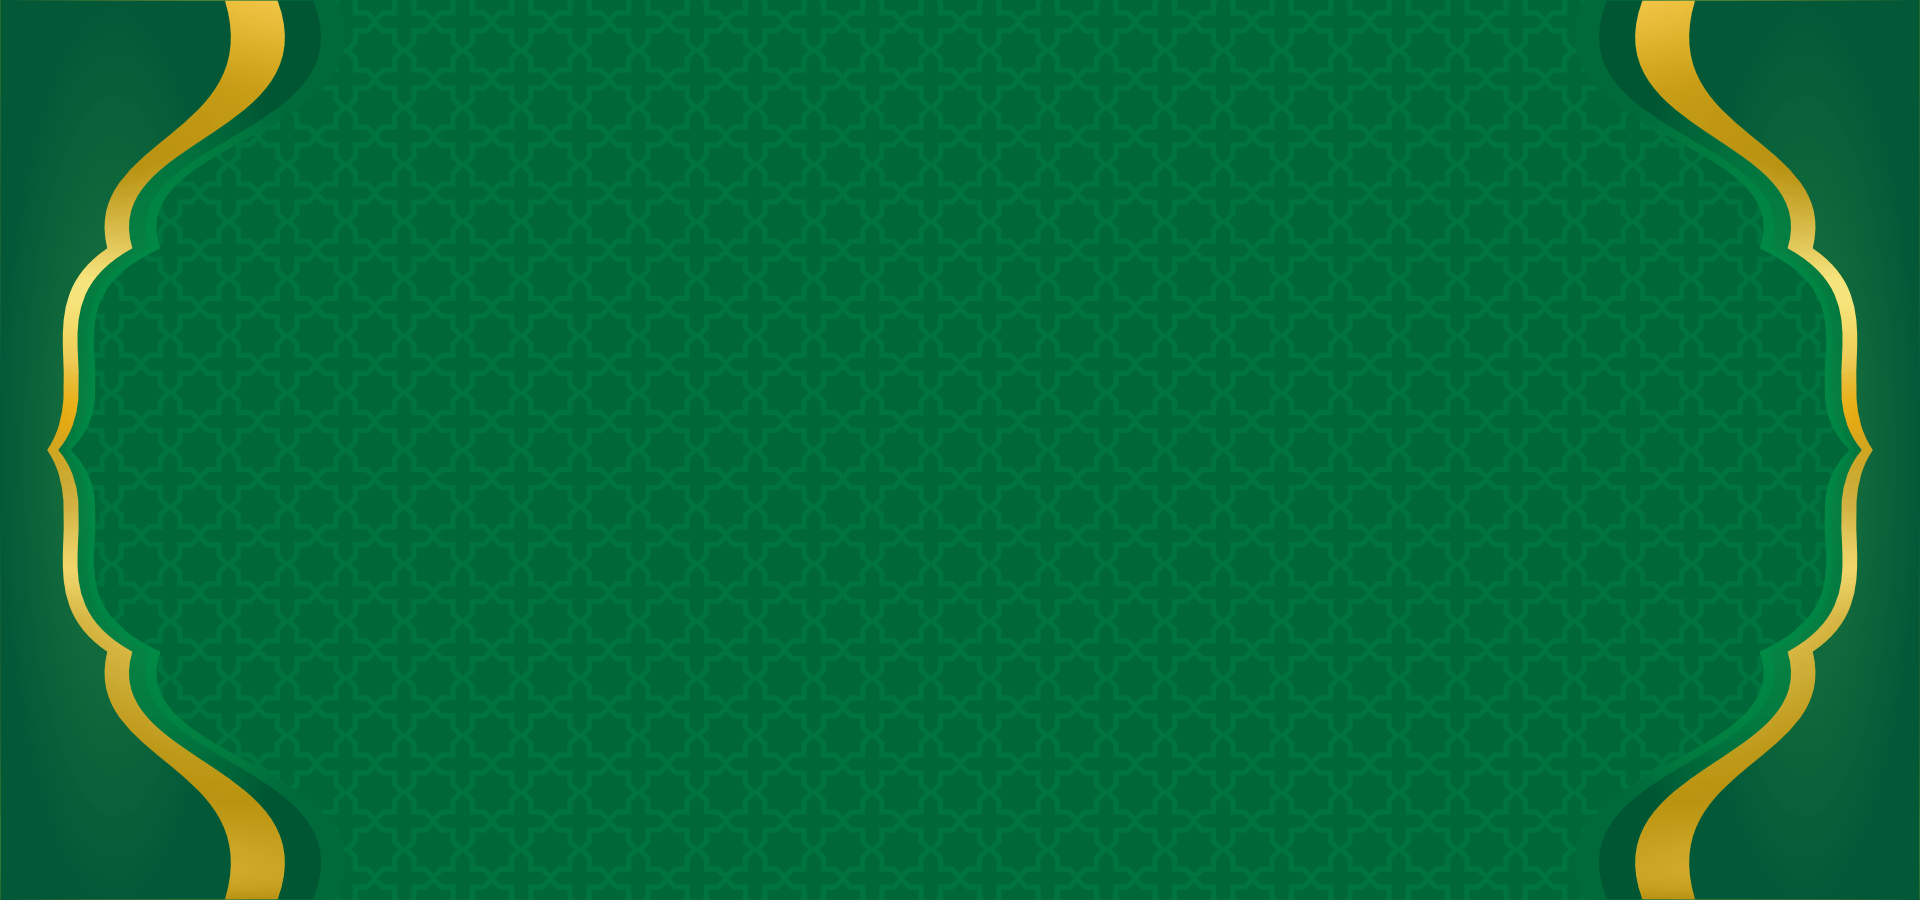 Green With Pattern Background